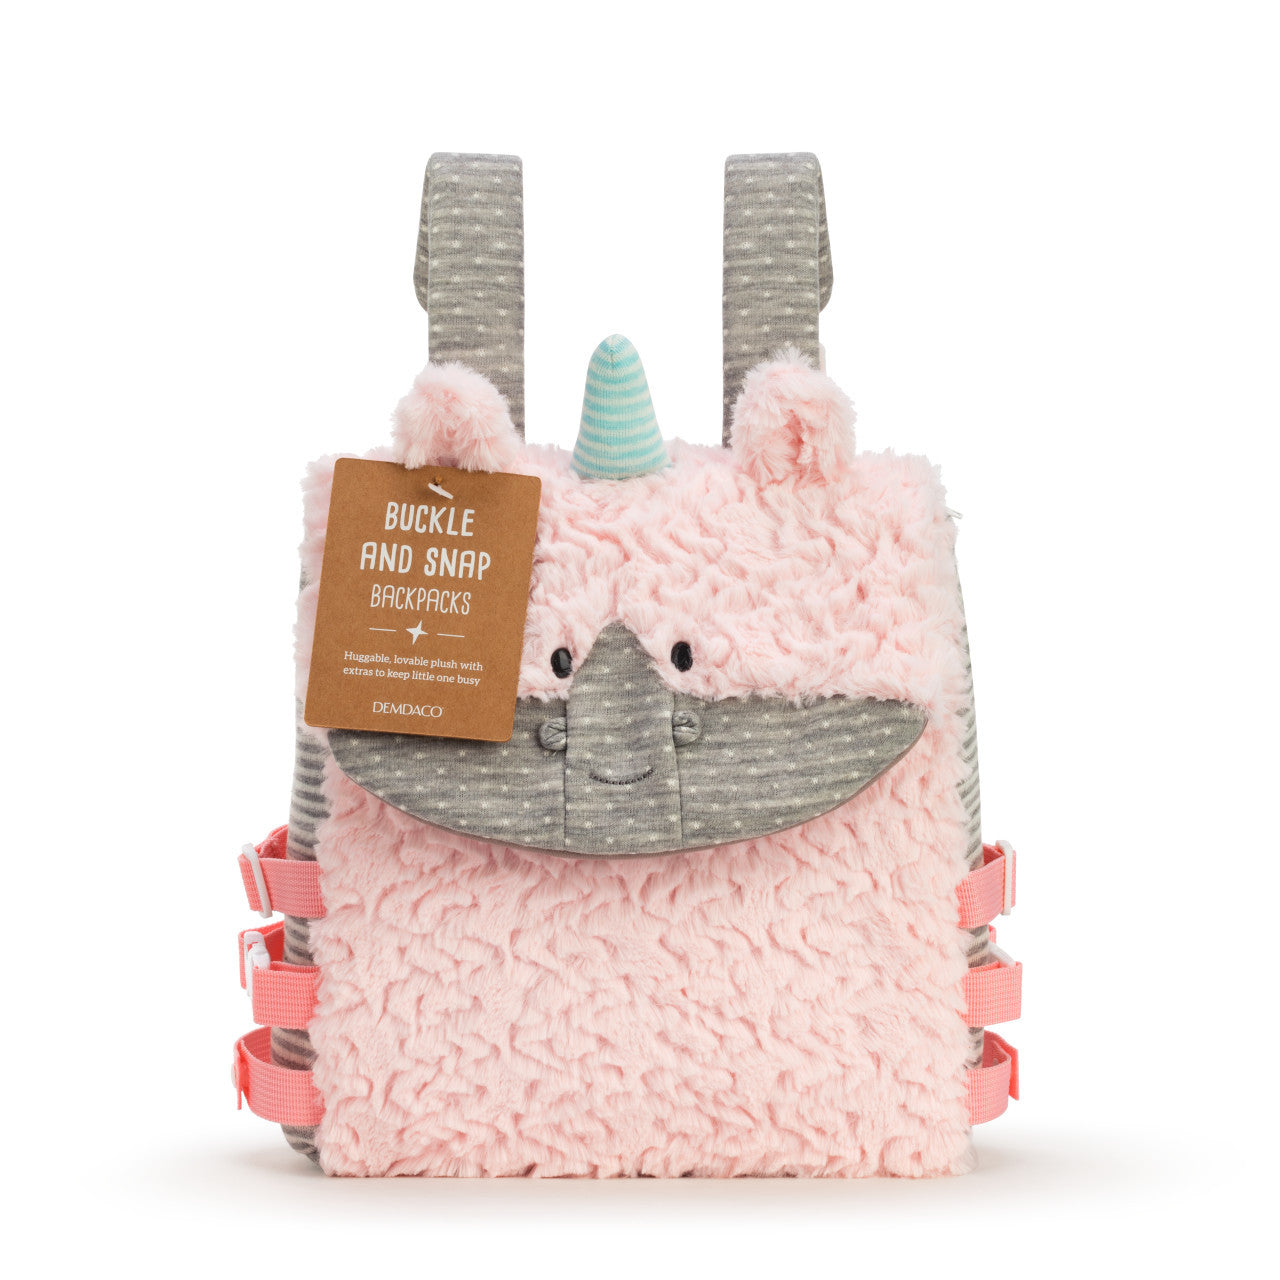 Buckle and Snap Backpack - Unicorn